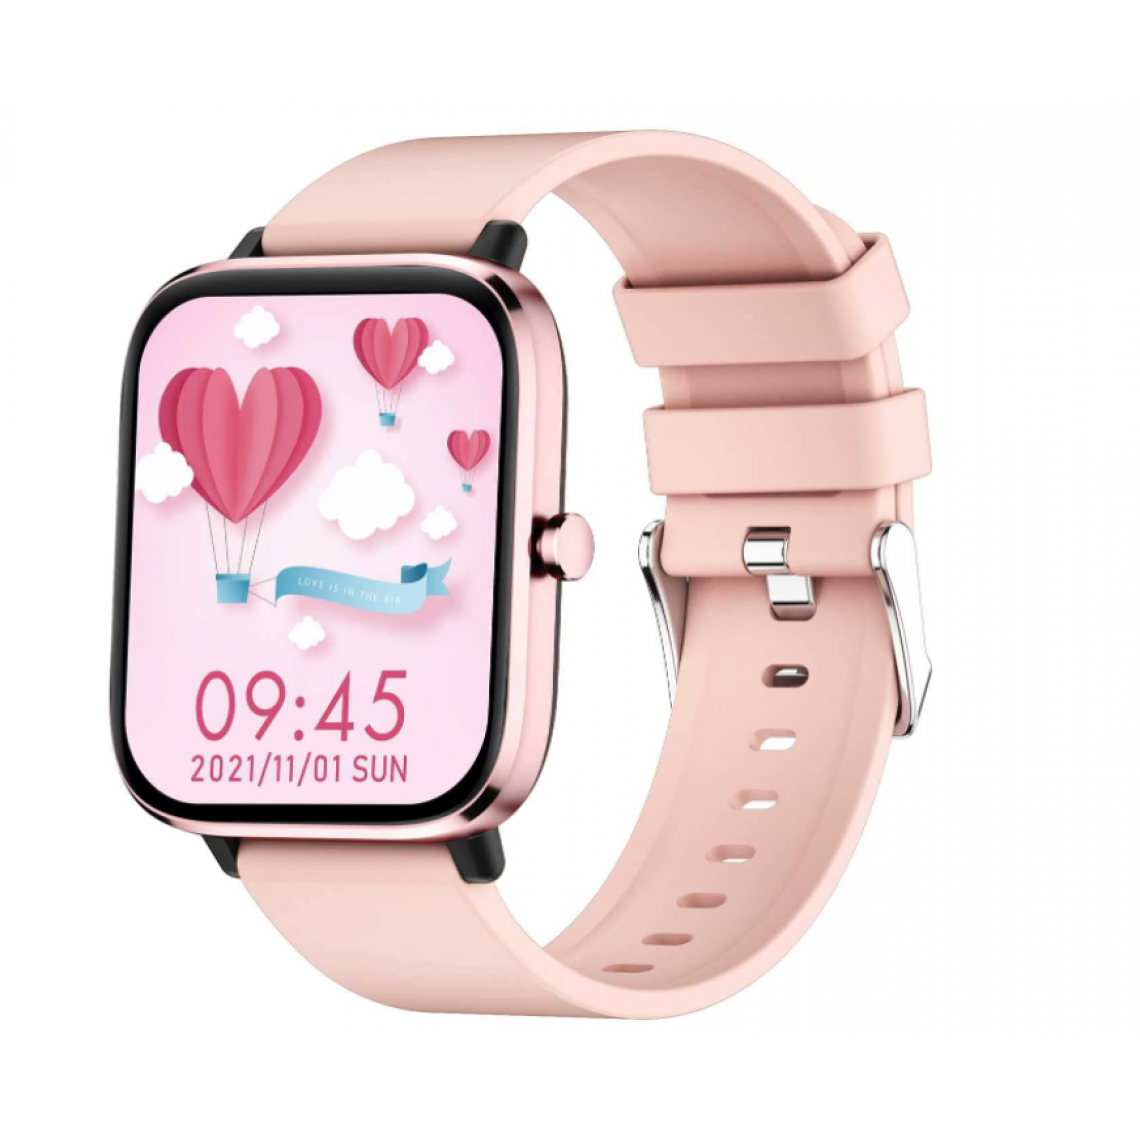 Chronotech Montres - Chronus Smart watch Fitness Tracker for Android and iOS Phones with Calling, 1.69 Inch HD Touch Screen Smart Watch with Activity Recording/Musicï¼pinkï¼ - Montre connectée